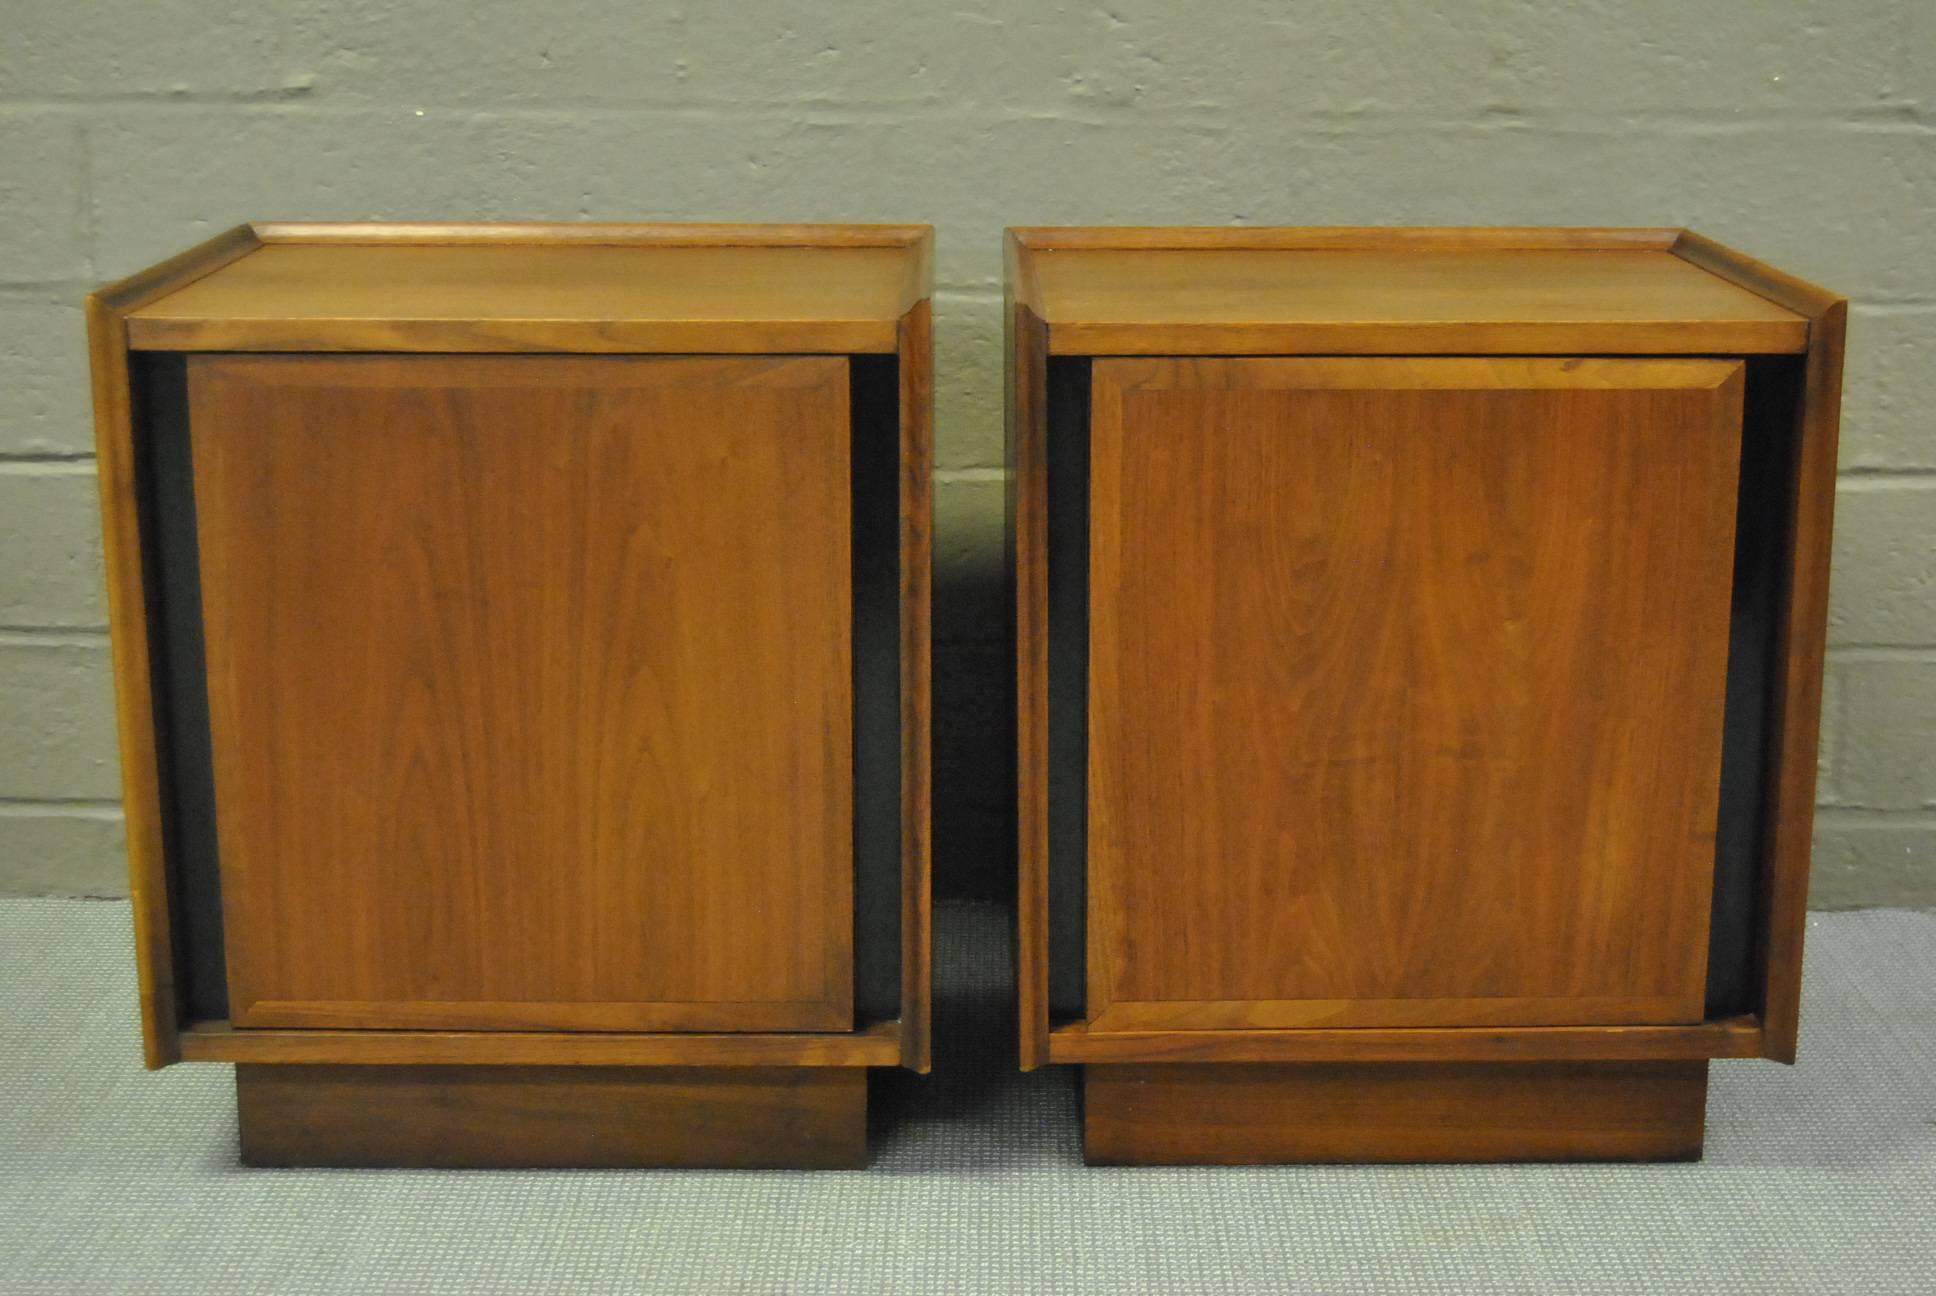 A great pair of walnut nightstands designed by Merton L. Gershun for Dillingham as part of their Esprit collection. Clean lines and great storage. Each stand has one white front drawer behind the door.